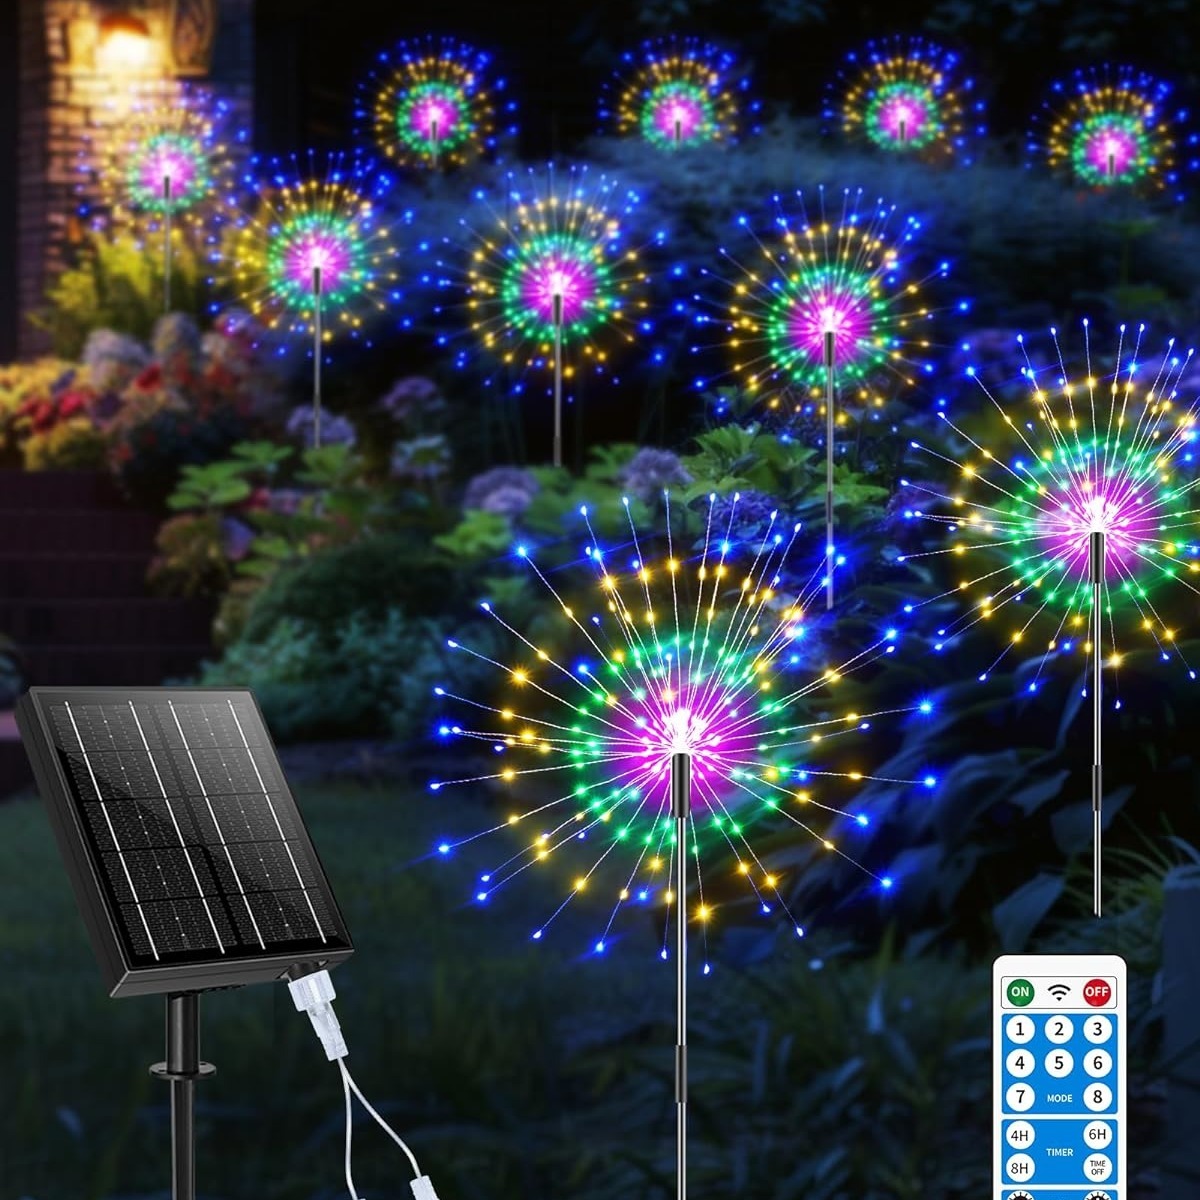 

Outdoor 10 Pack With 1500 Leds, Solar Firework Lights, 8 Modes Flexible Copper Wire Diy With Remote For Patio Walkway Pathway Yard Flowerbed Decor. ( 10 Pack)